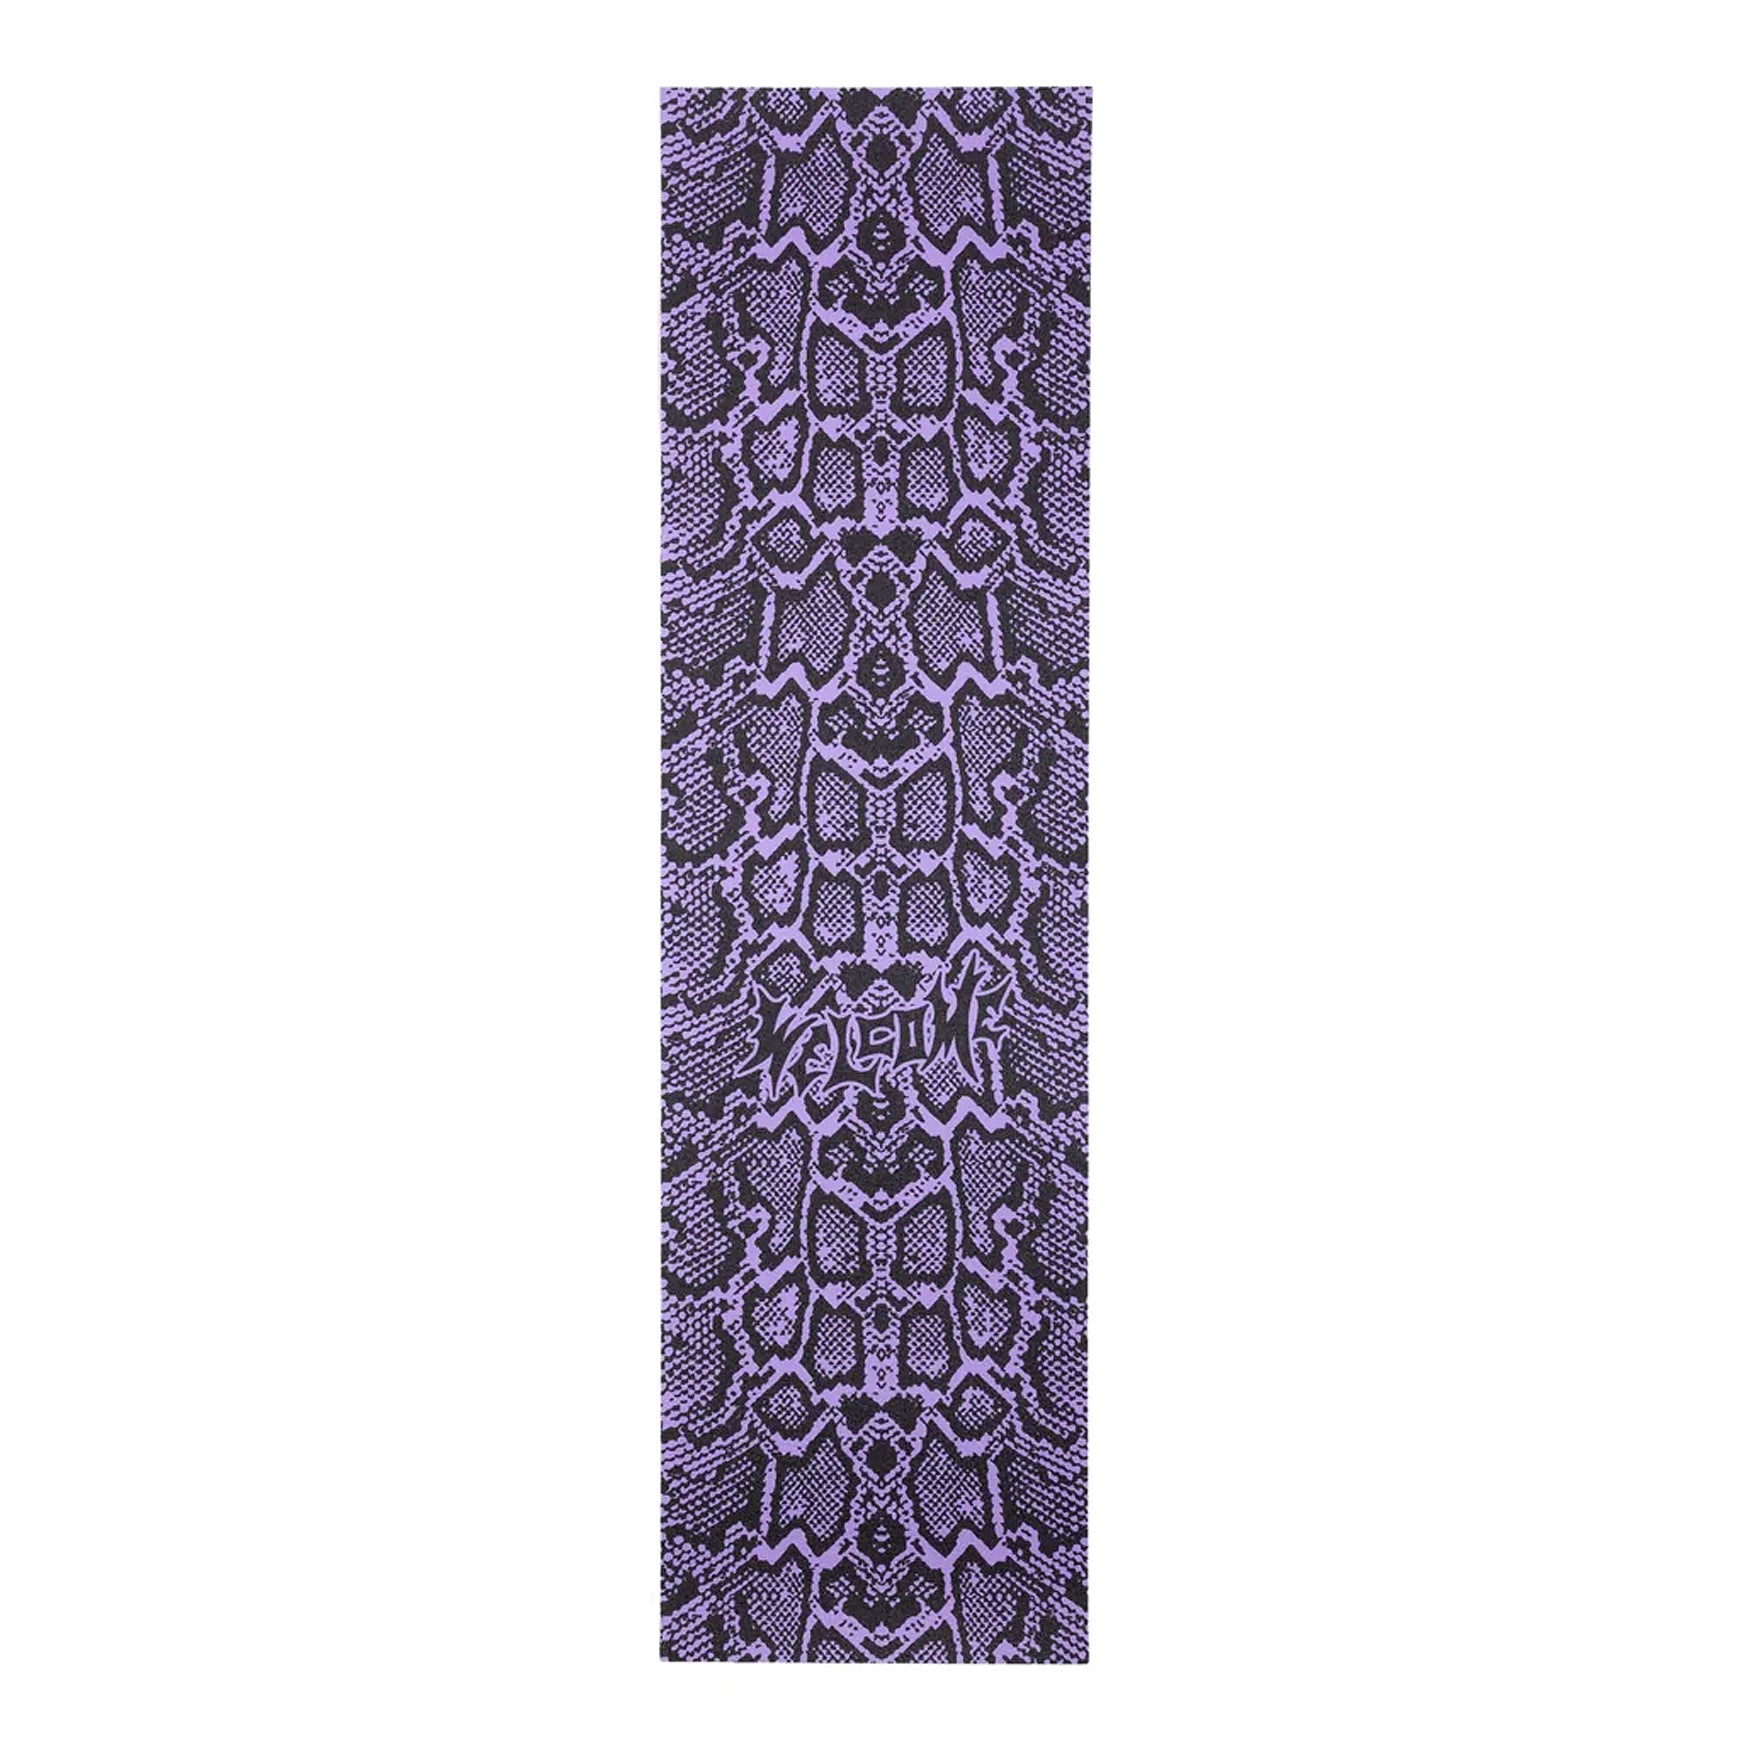 Welcome - Serpent Grip Tape 33 x 9" - Purple - Prime Delux Store